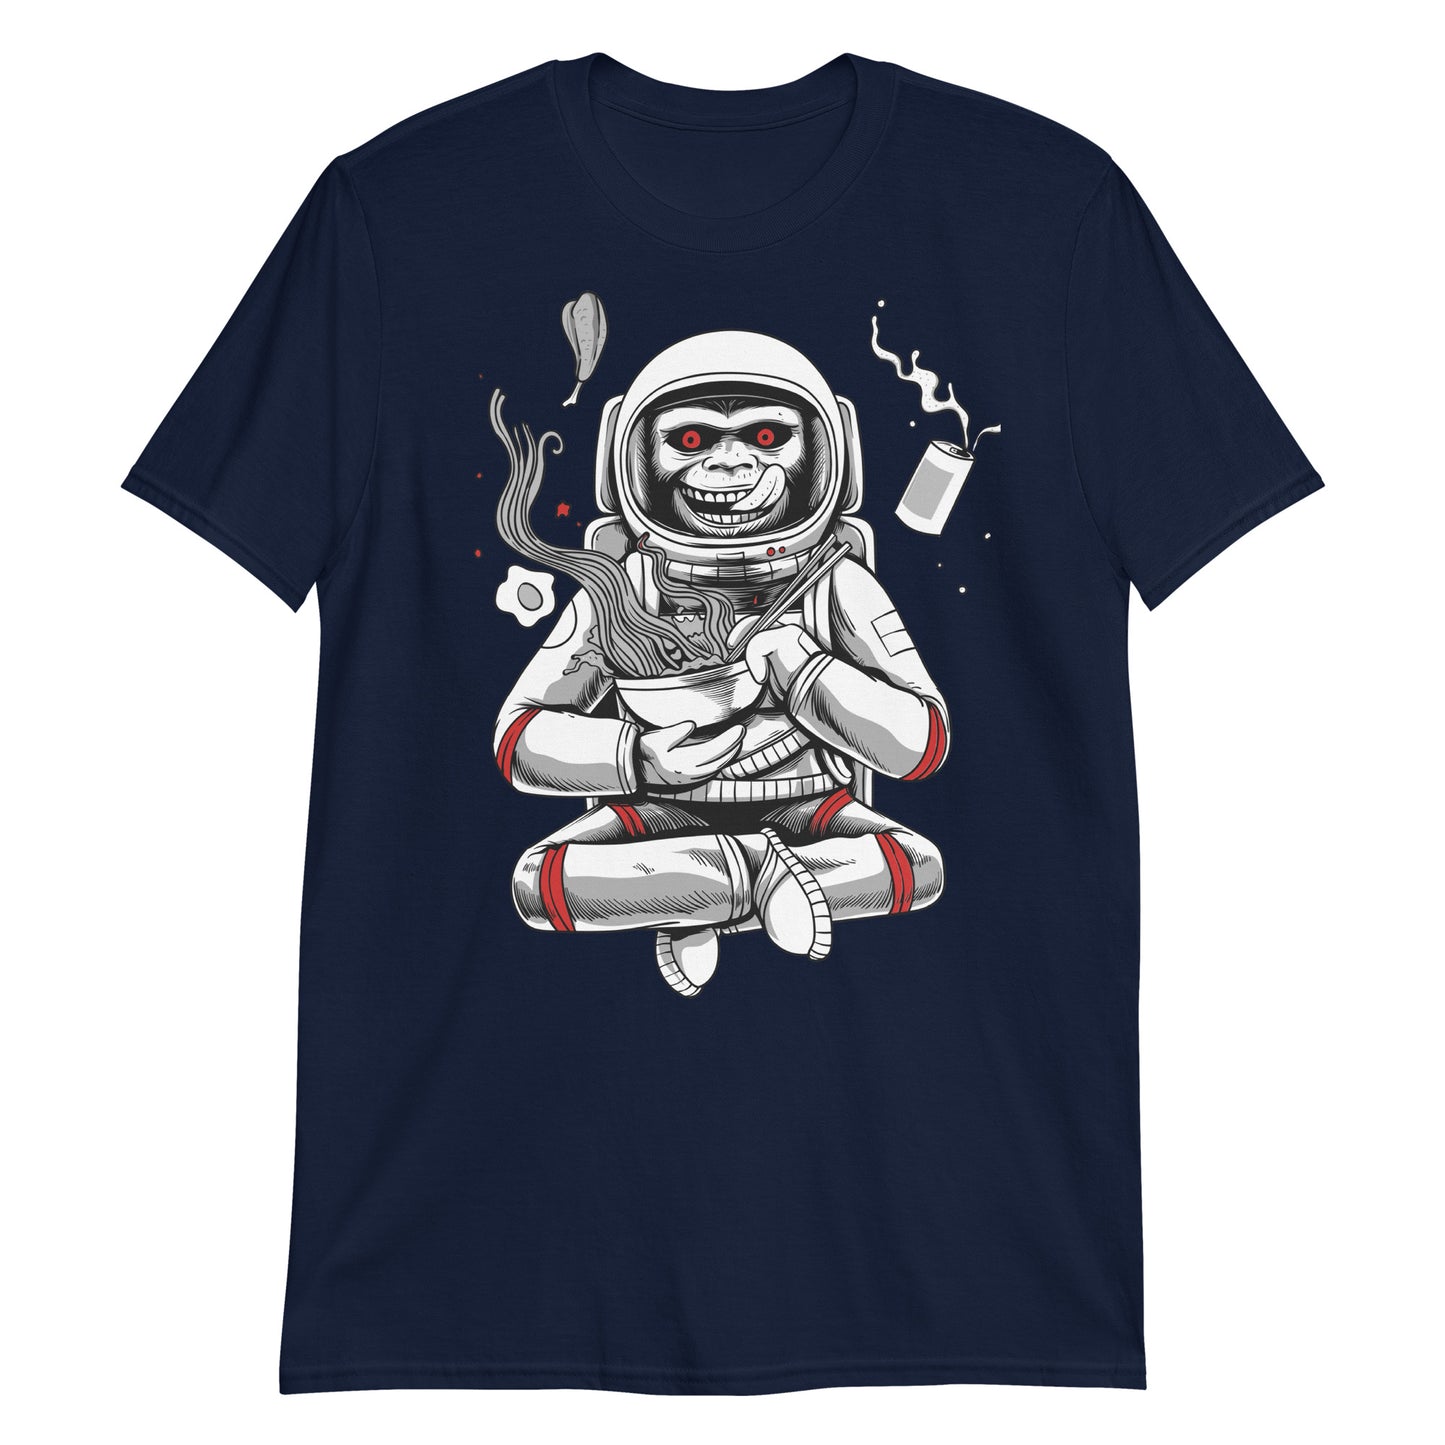 Space Monkey Astronaut T-Shirt - Reach for the Stars